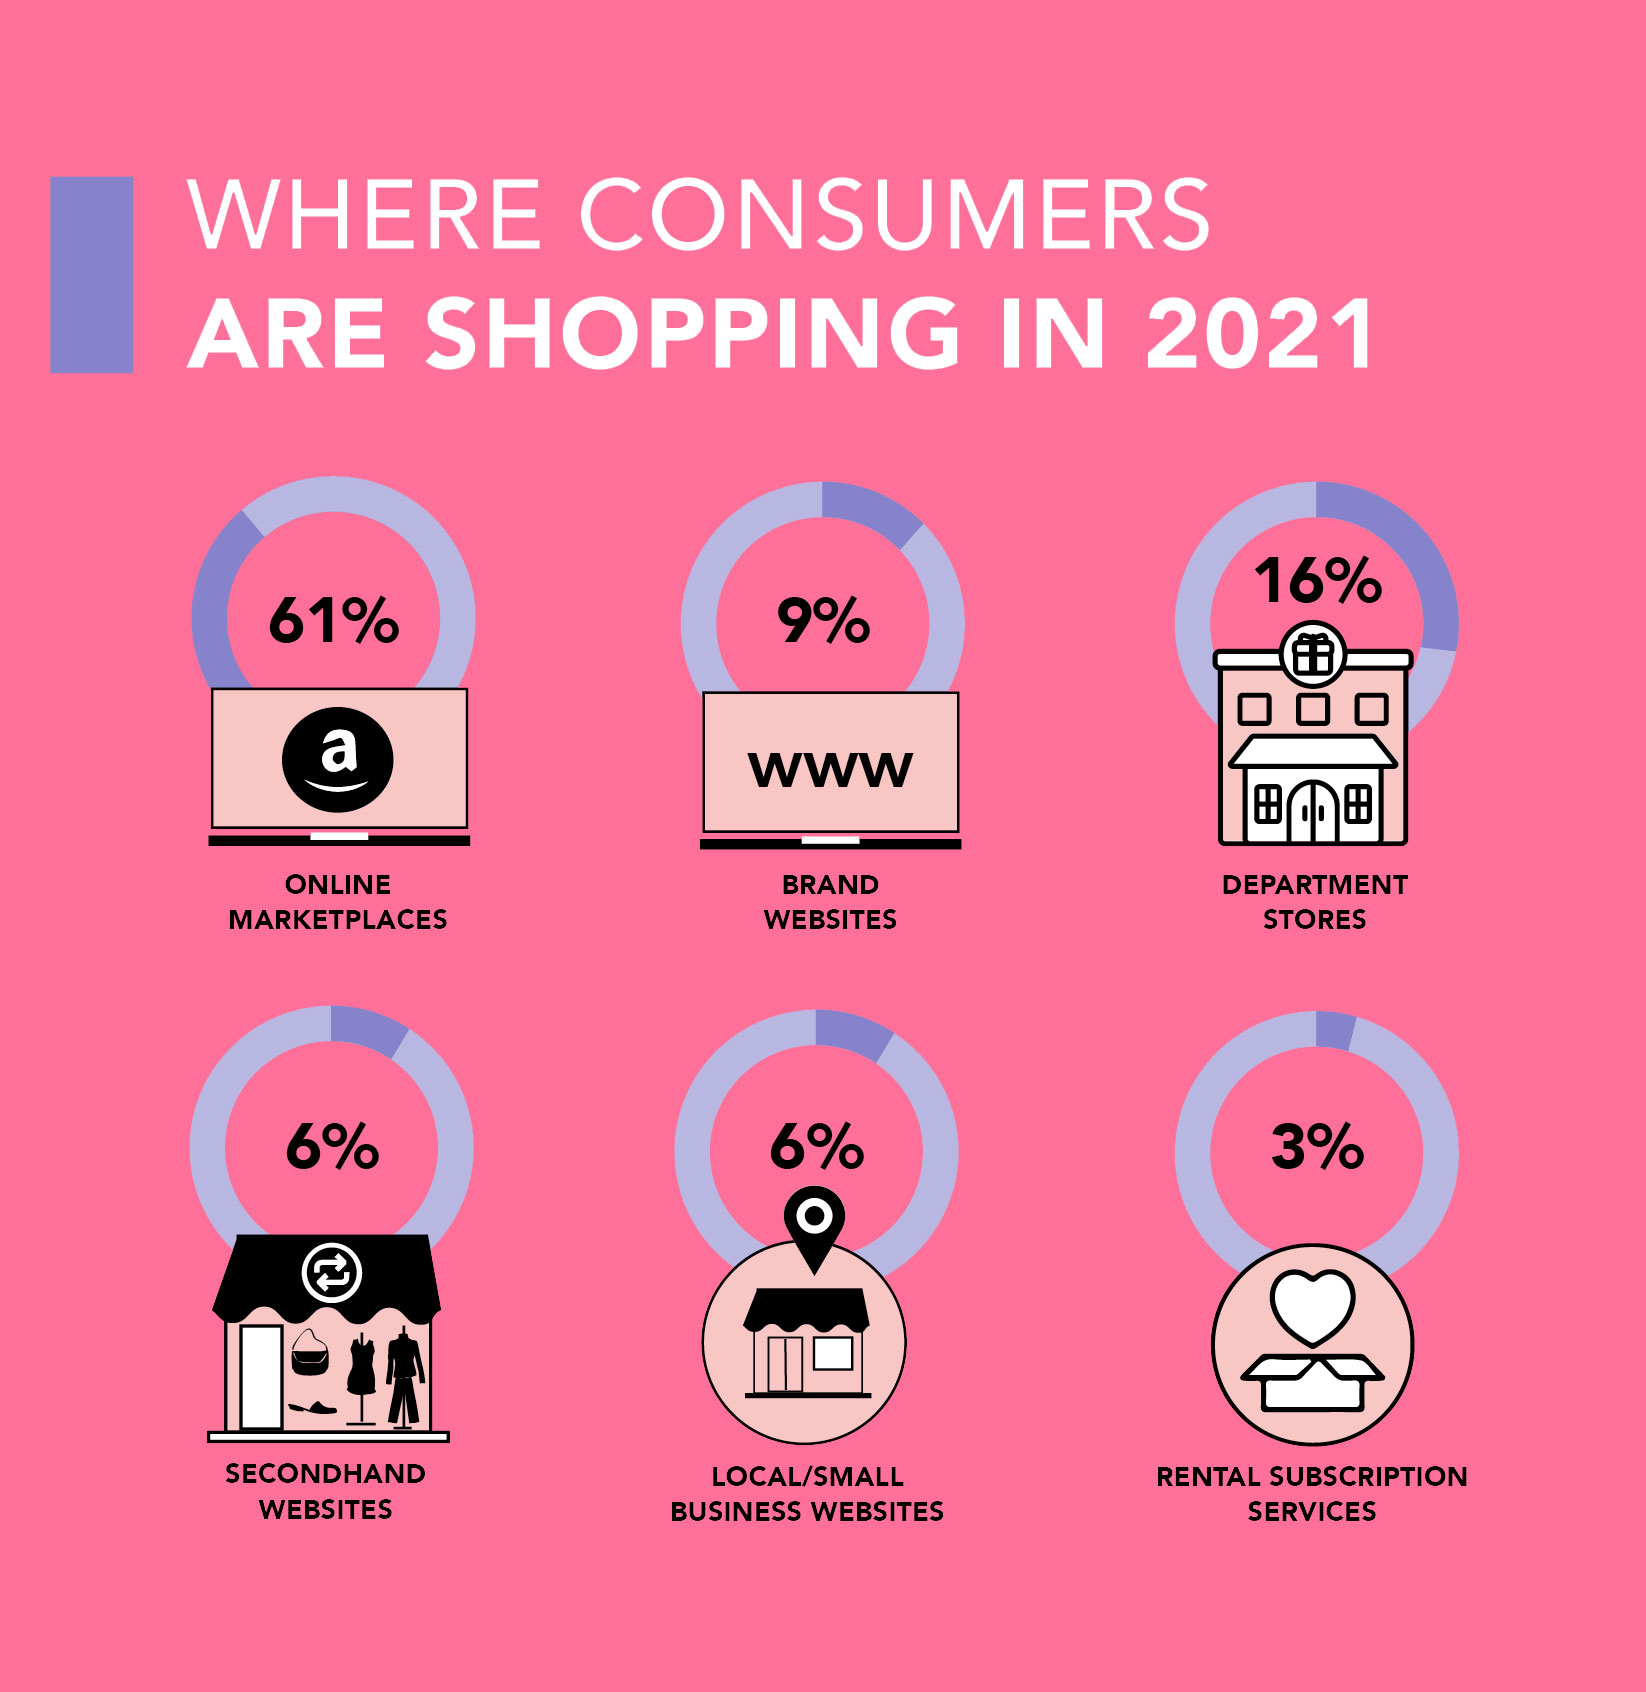 Where consumers are shopping infographic image